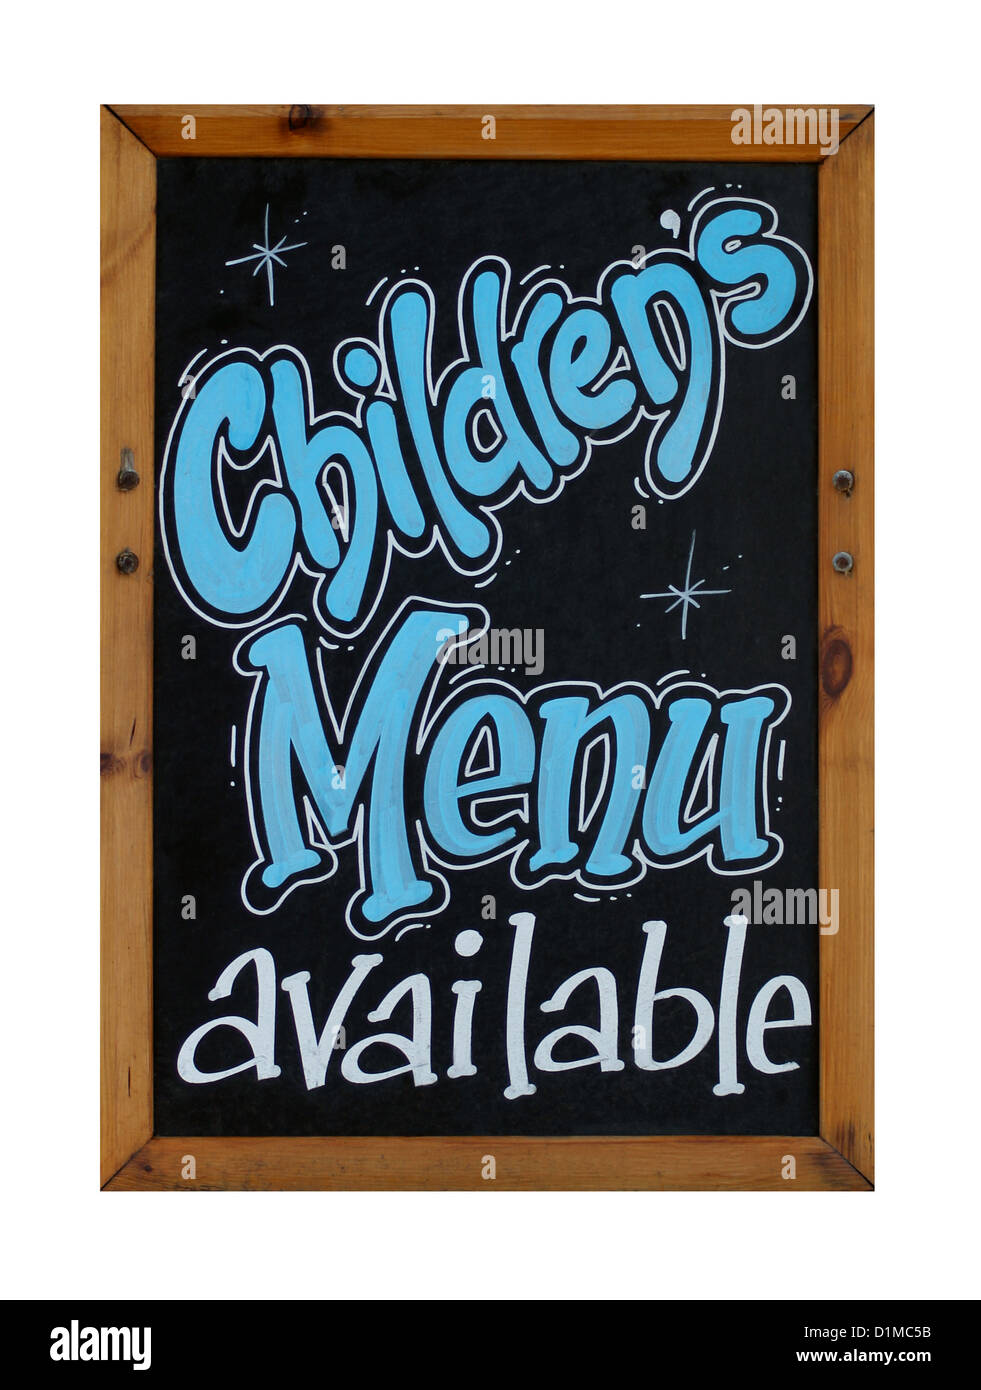 Childrens menu available sign on blackboard or chalkboard isolated on white background. Stock Photo